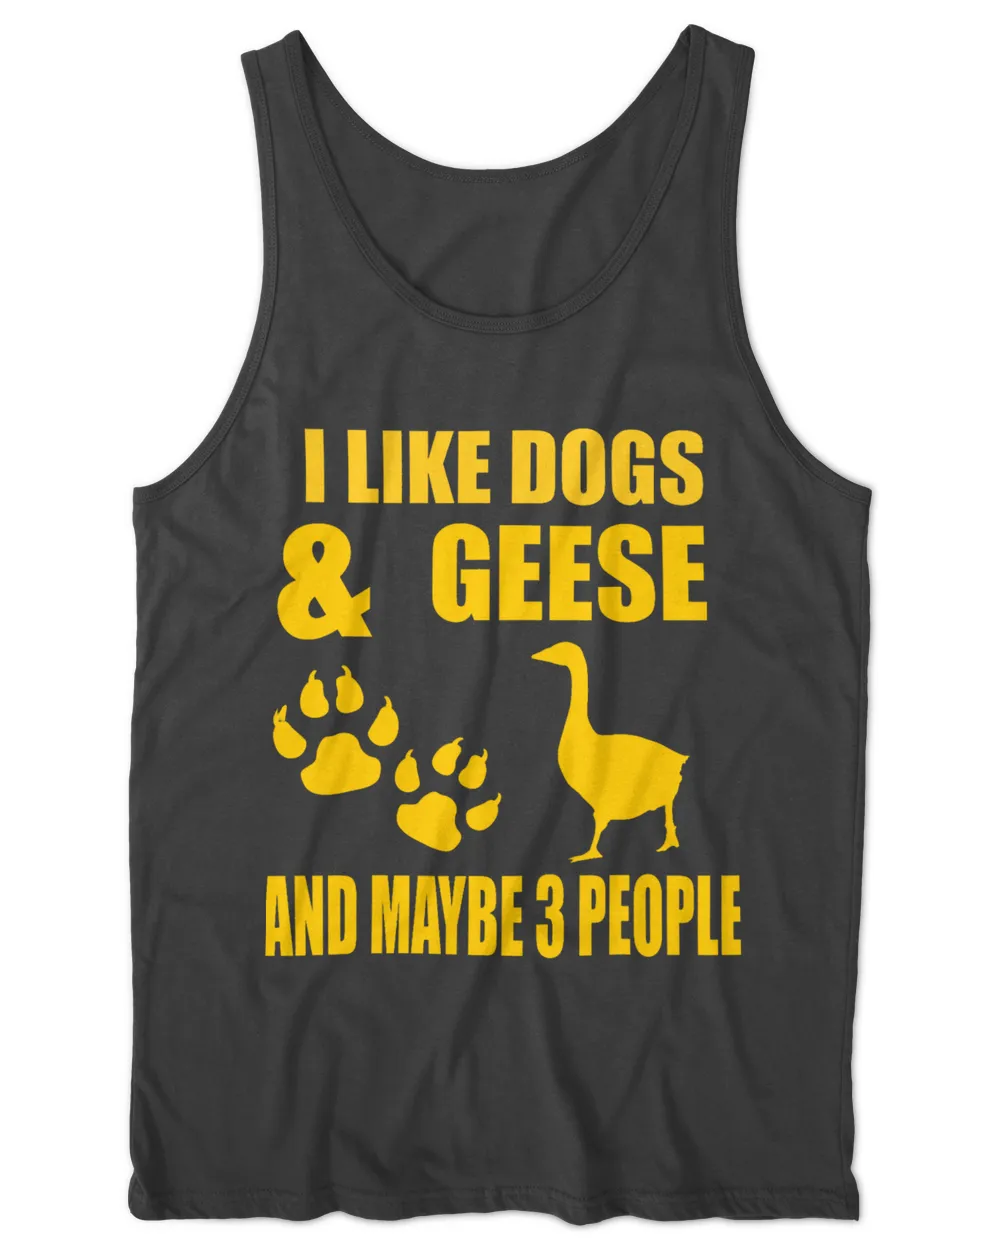 I Like Dogs and Geese Funny Animal Lover Outfit